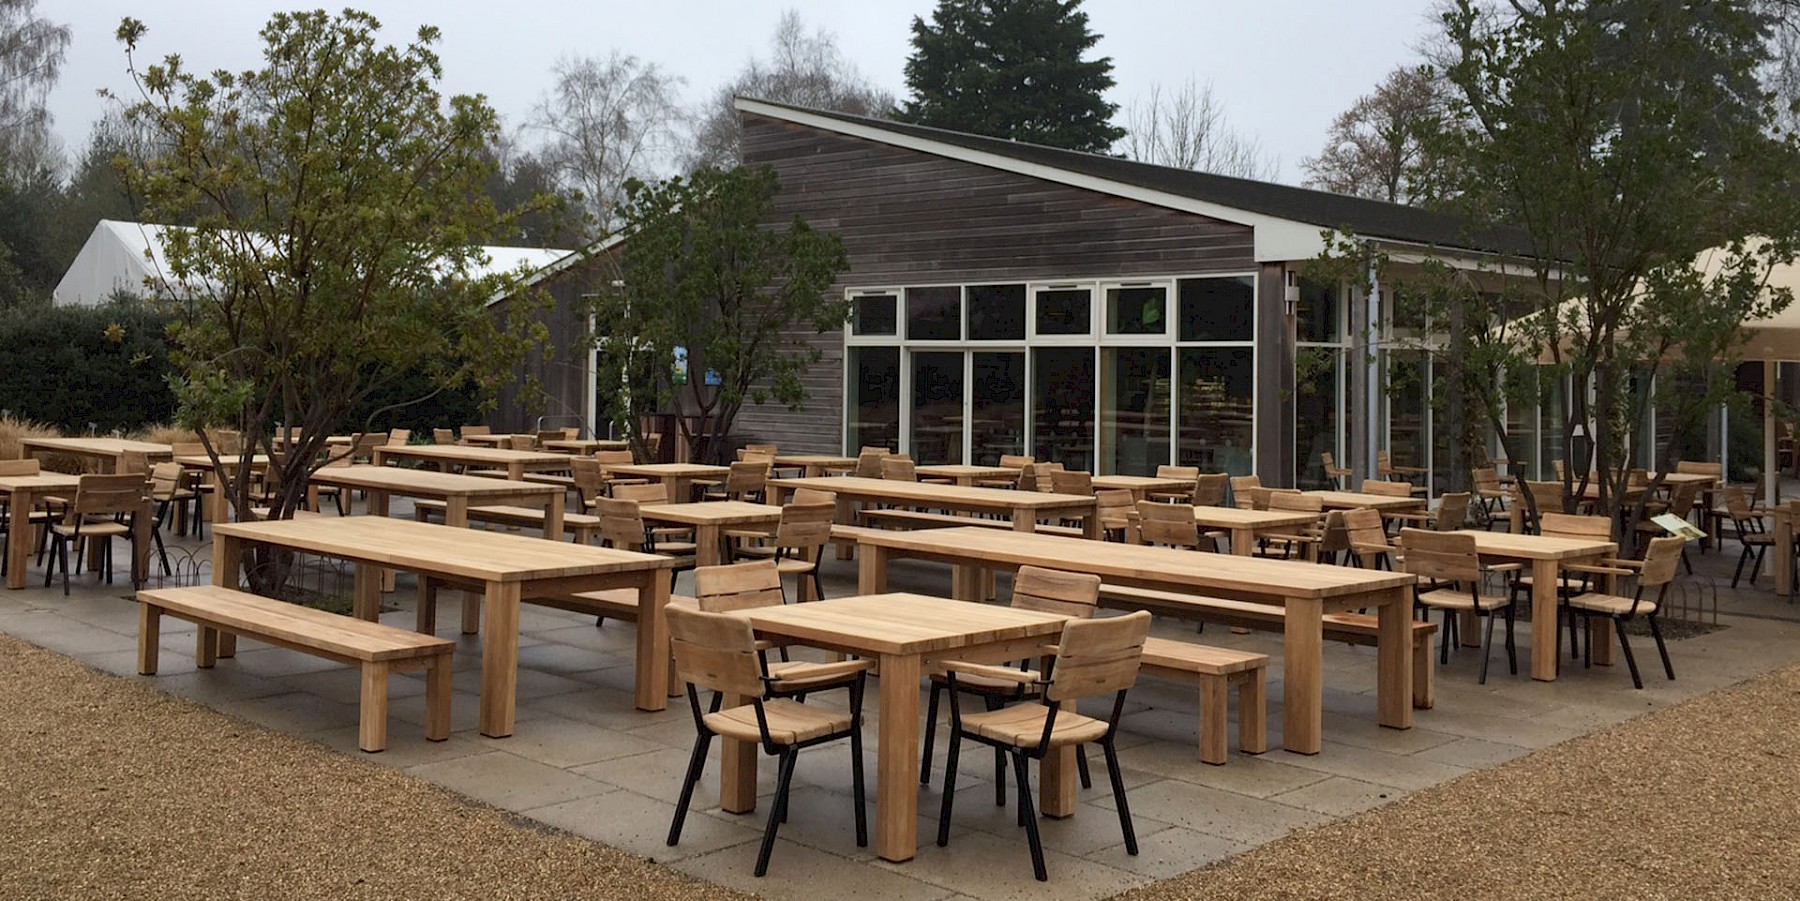 Barlow Tyrie delivered to RHS Wisley Glasshouse Cafe image